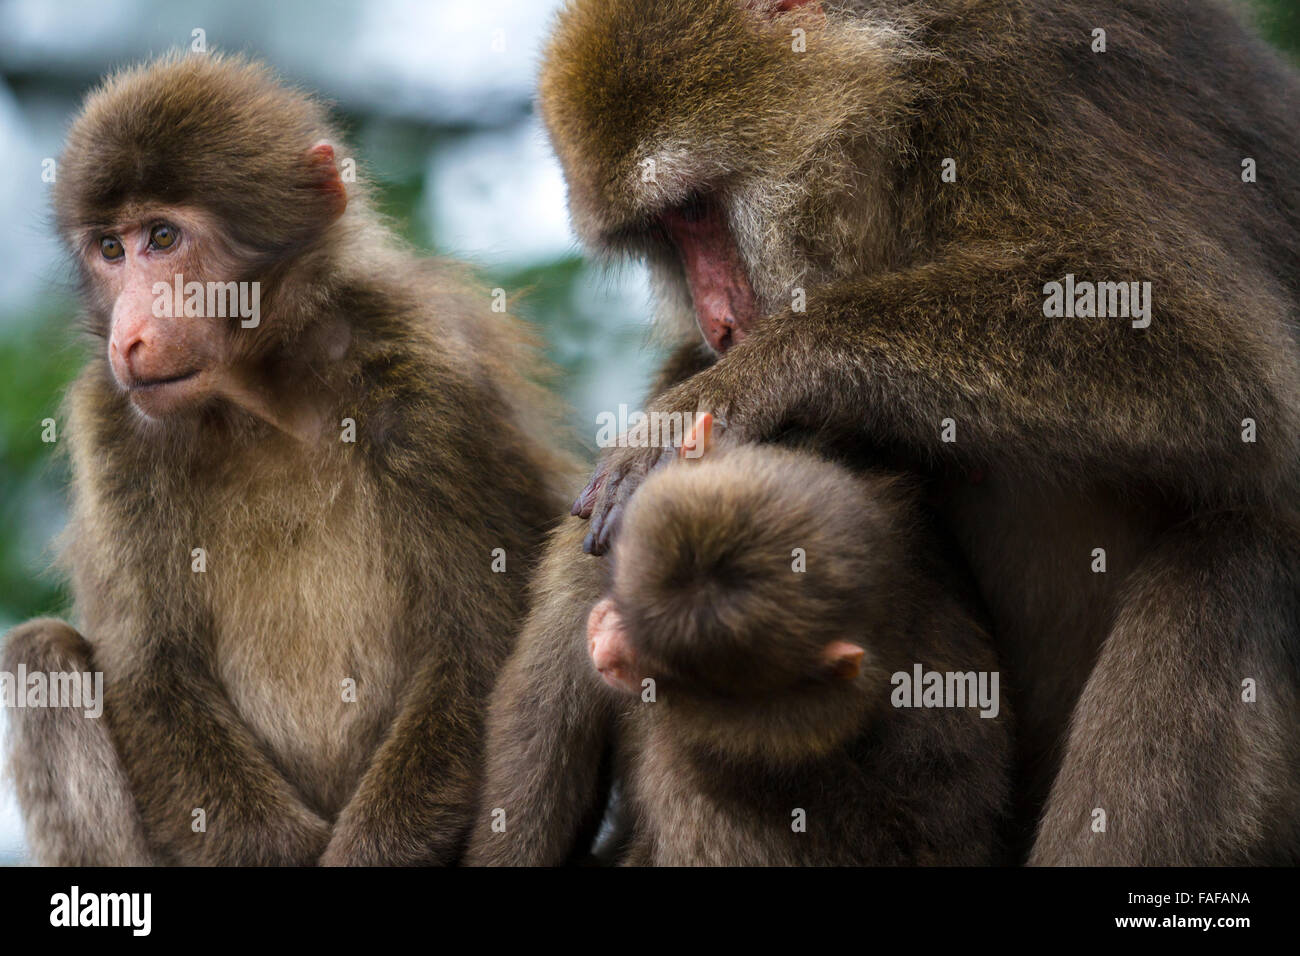 Mt.Emei, Sichuan province, China - Close up of the cute macaque in the wild. Stock Photo